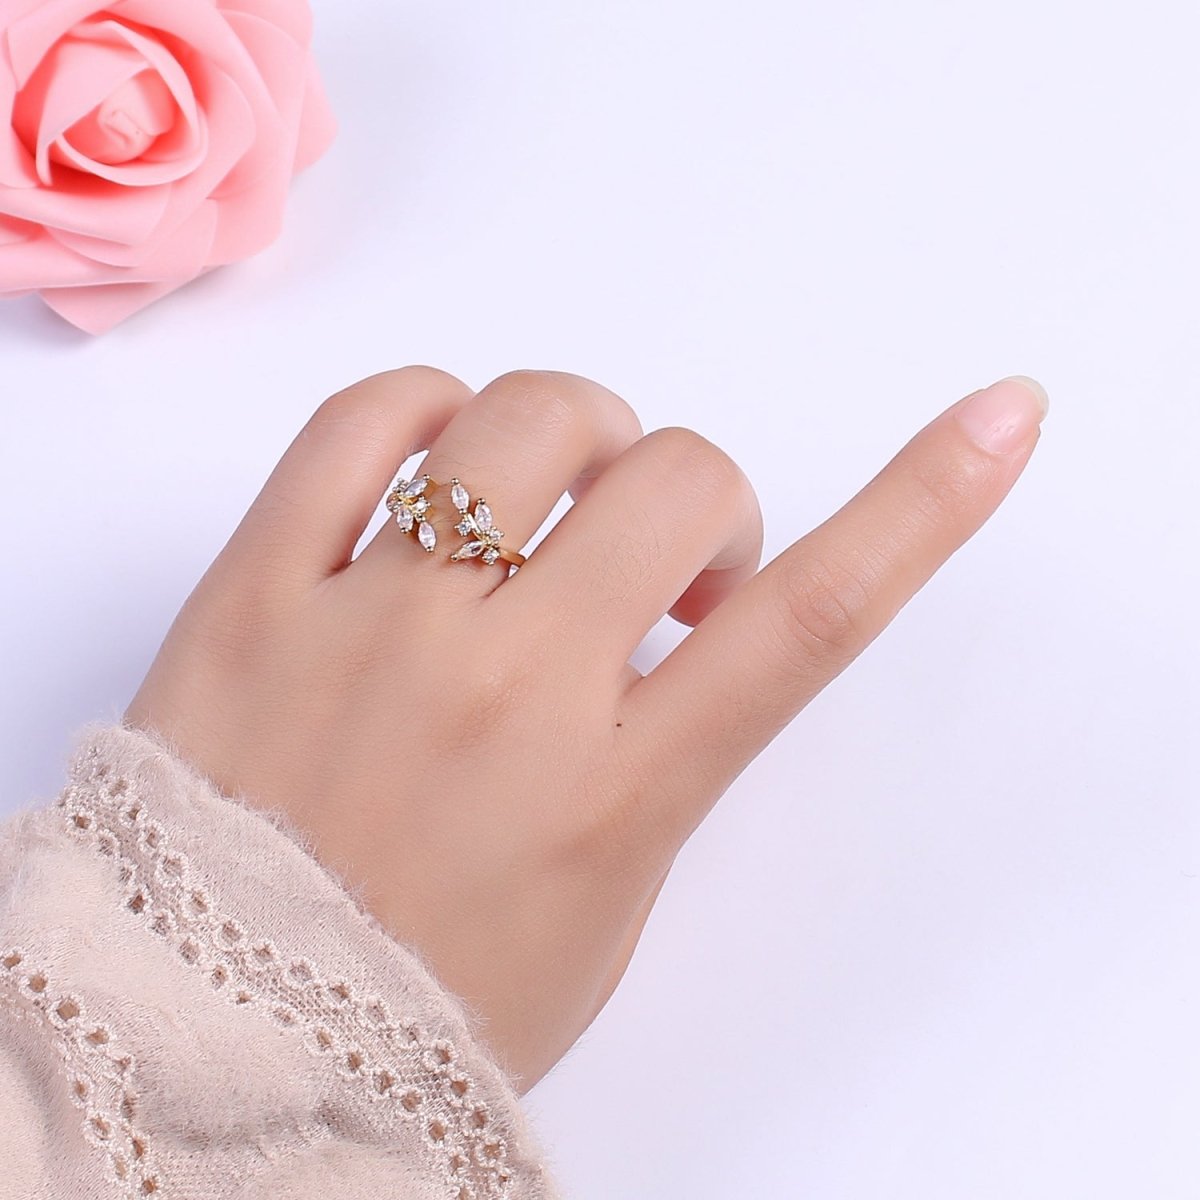 Gold Marquise Ring, Cz Open Adjustable Stacking Rings, Curved Ring, Birthday Gift for Her, Anniversary Gift, Crown Gold Ring Open Ring U-028 - DLUXCA